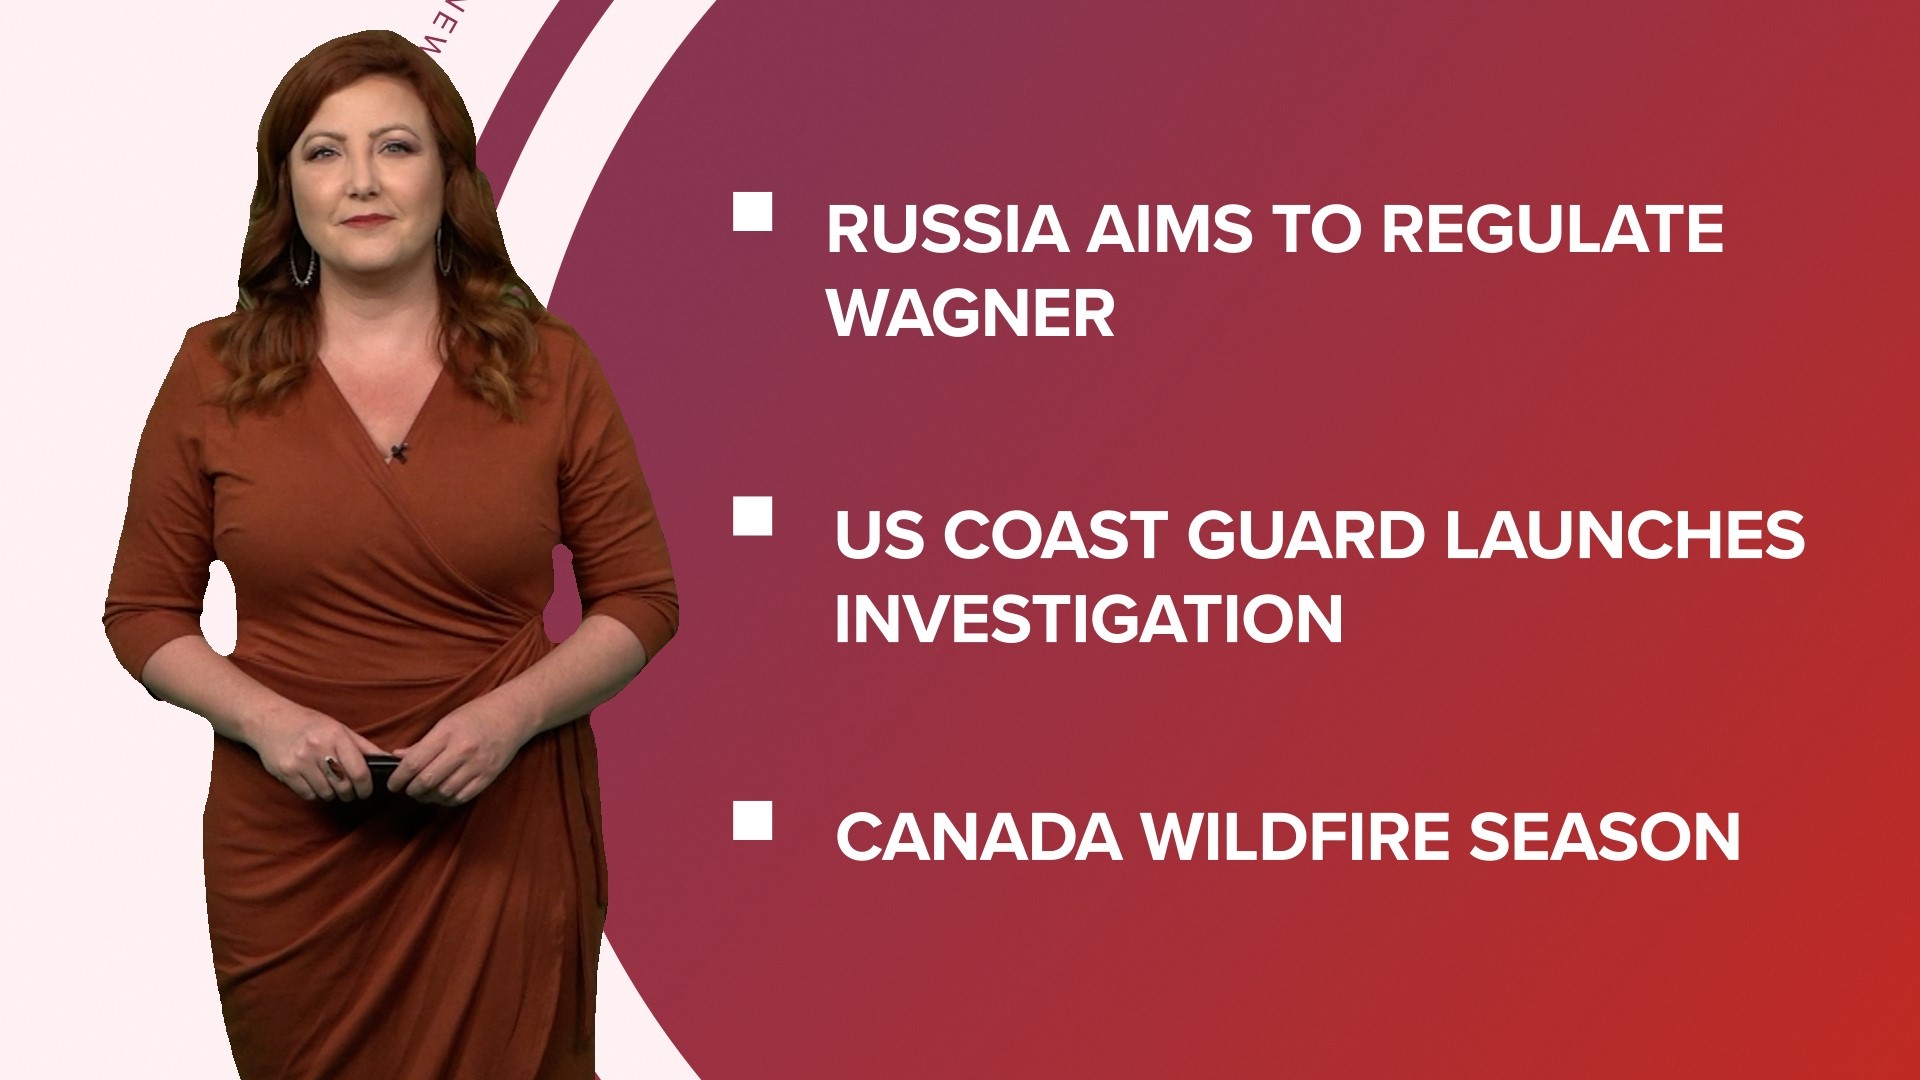 A look at what is happening in the news from a Wagner revolt in Russia to the US Coast Guard launching investigation into Titan implosion and algae blooms and pets.